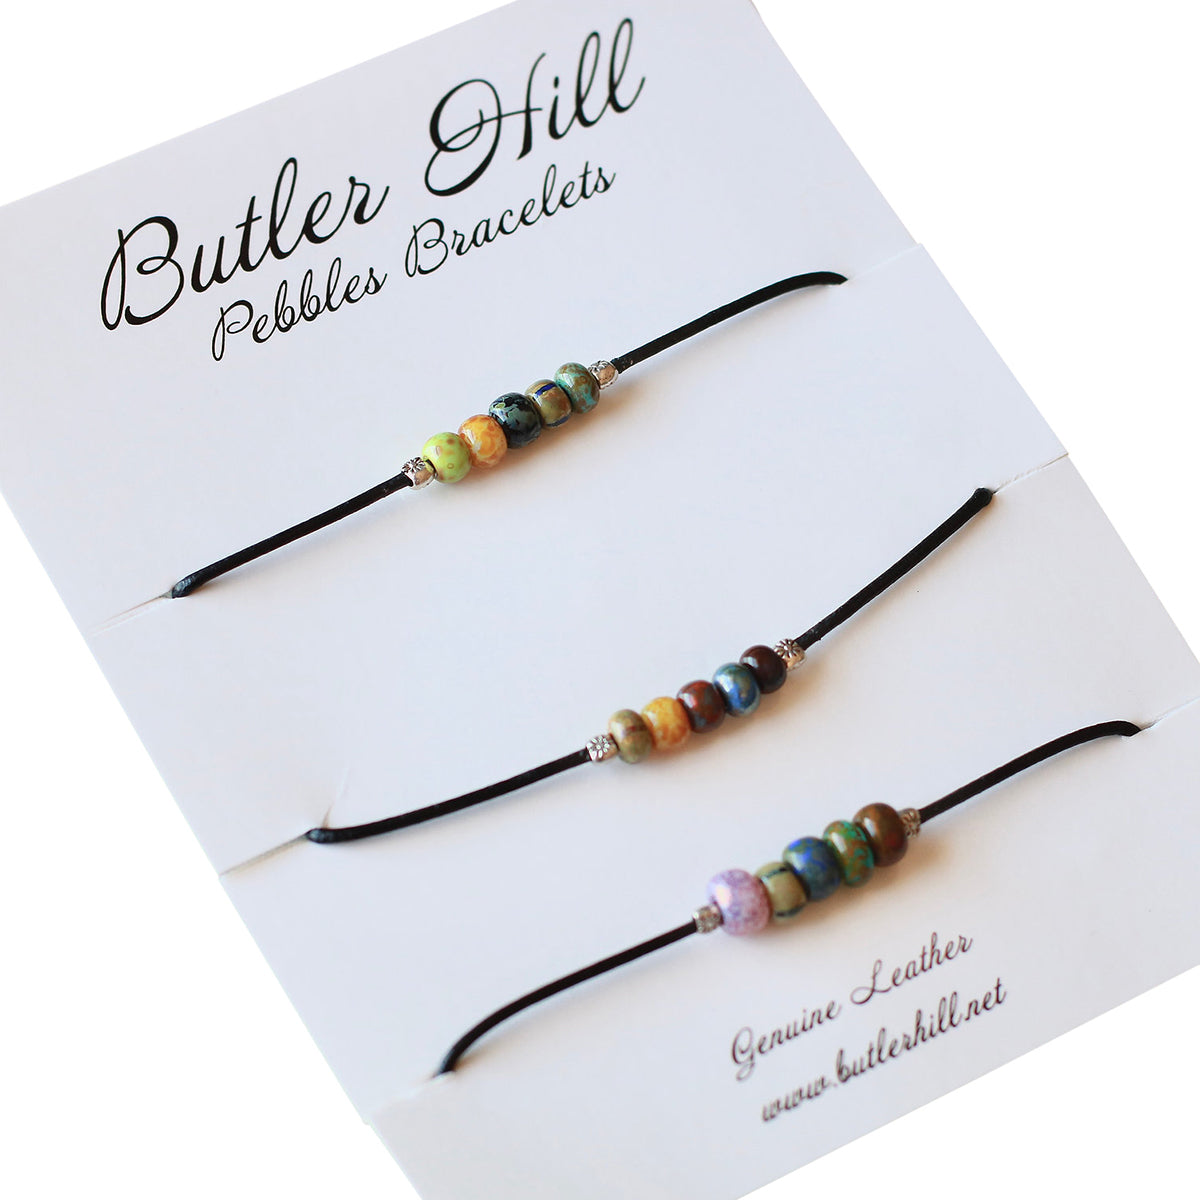 Three Butler Hill Pebble Bracelet Packs Small on a display card, featuring natural European leather bands.